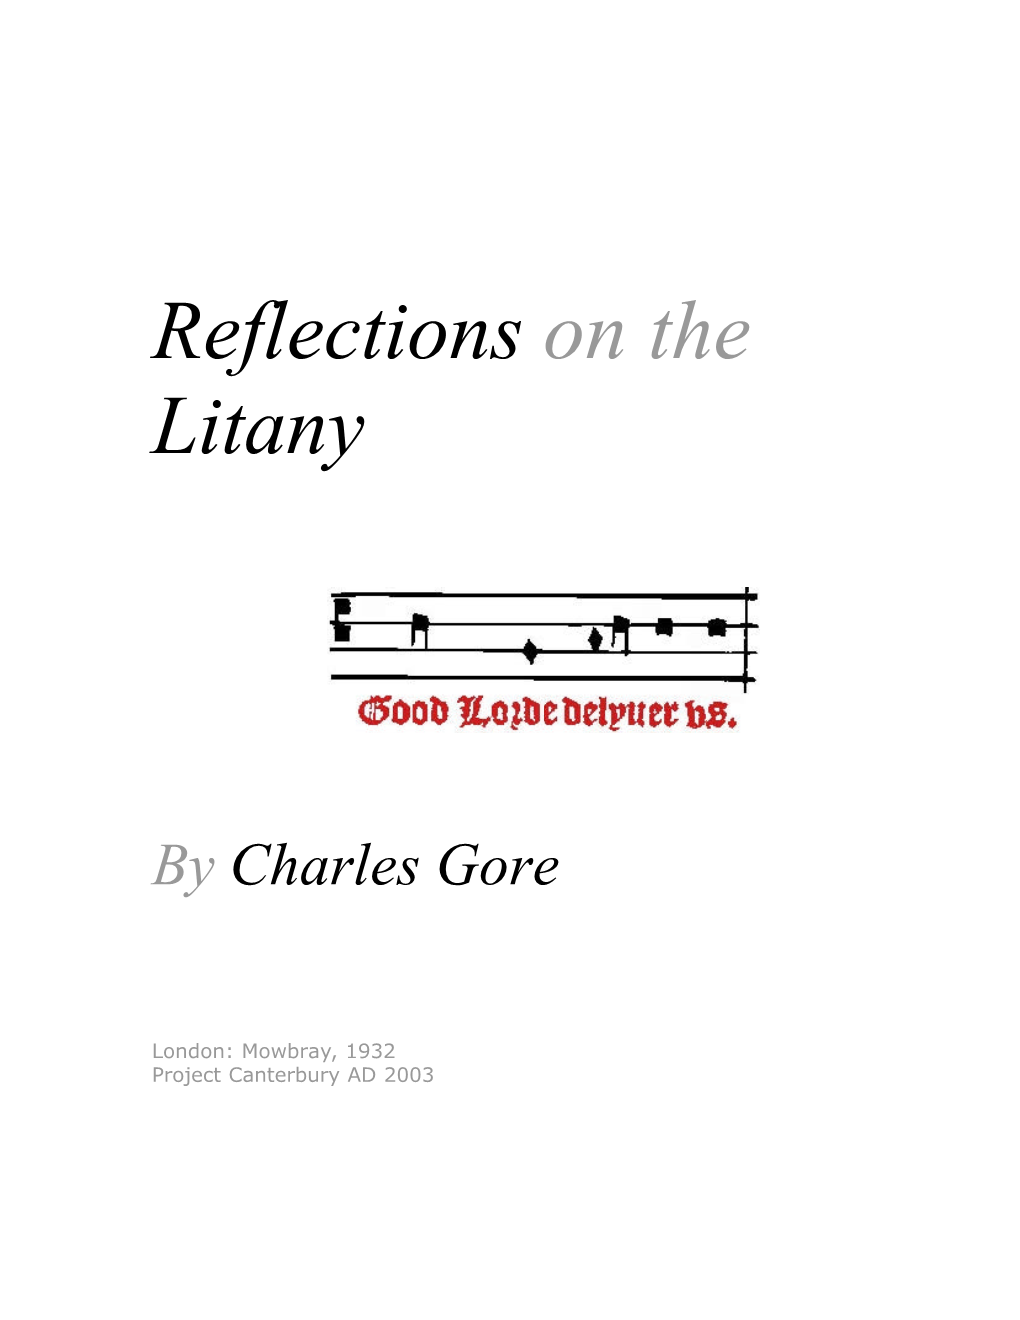 Reflections on the Litany